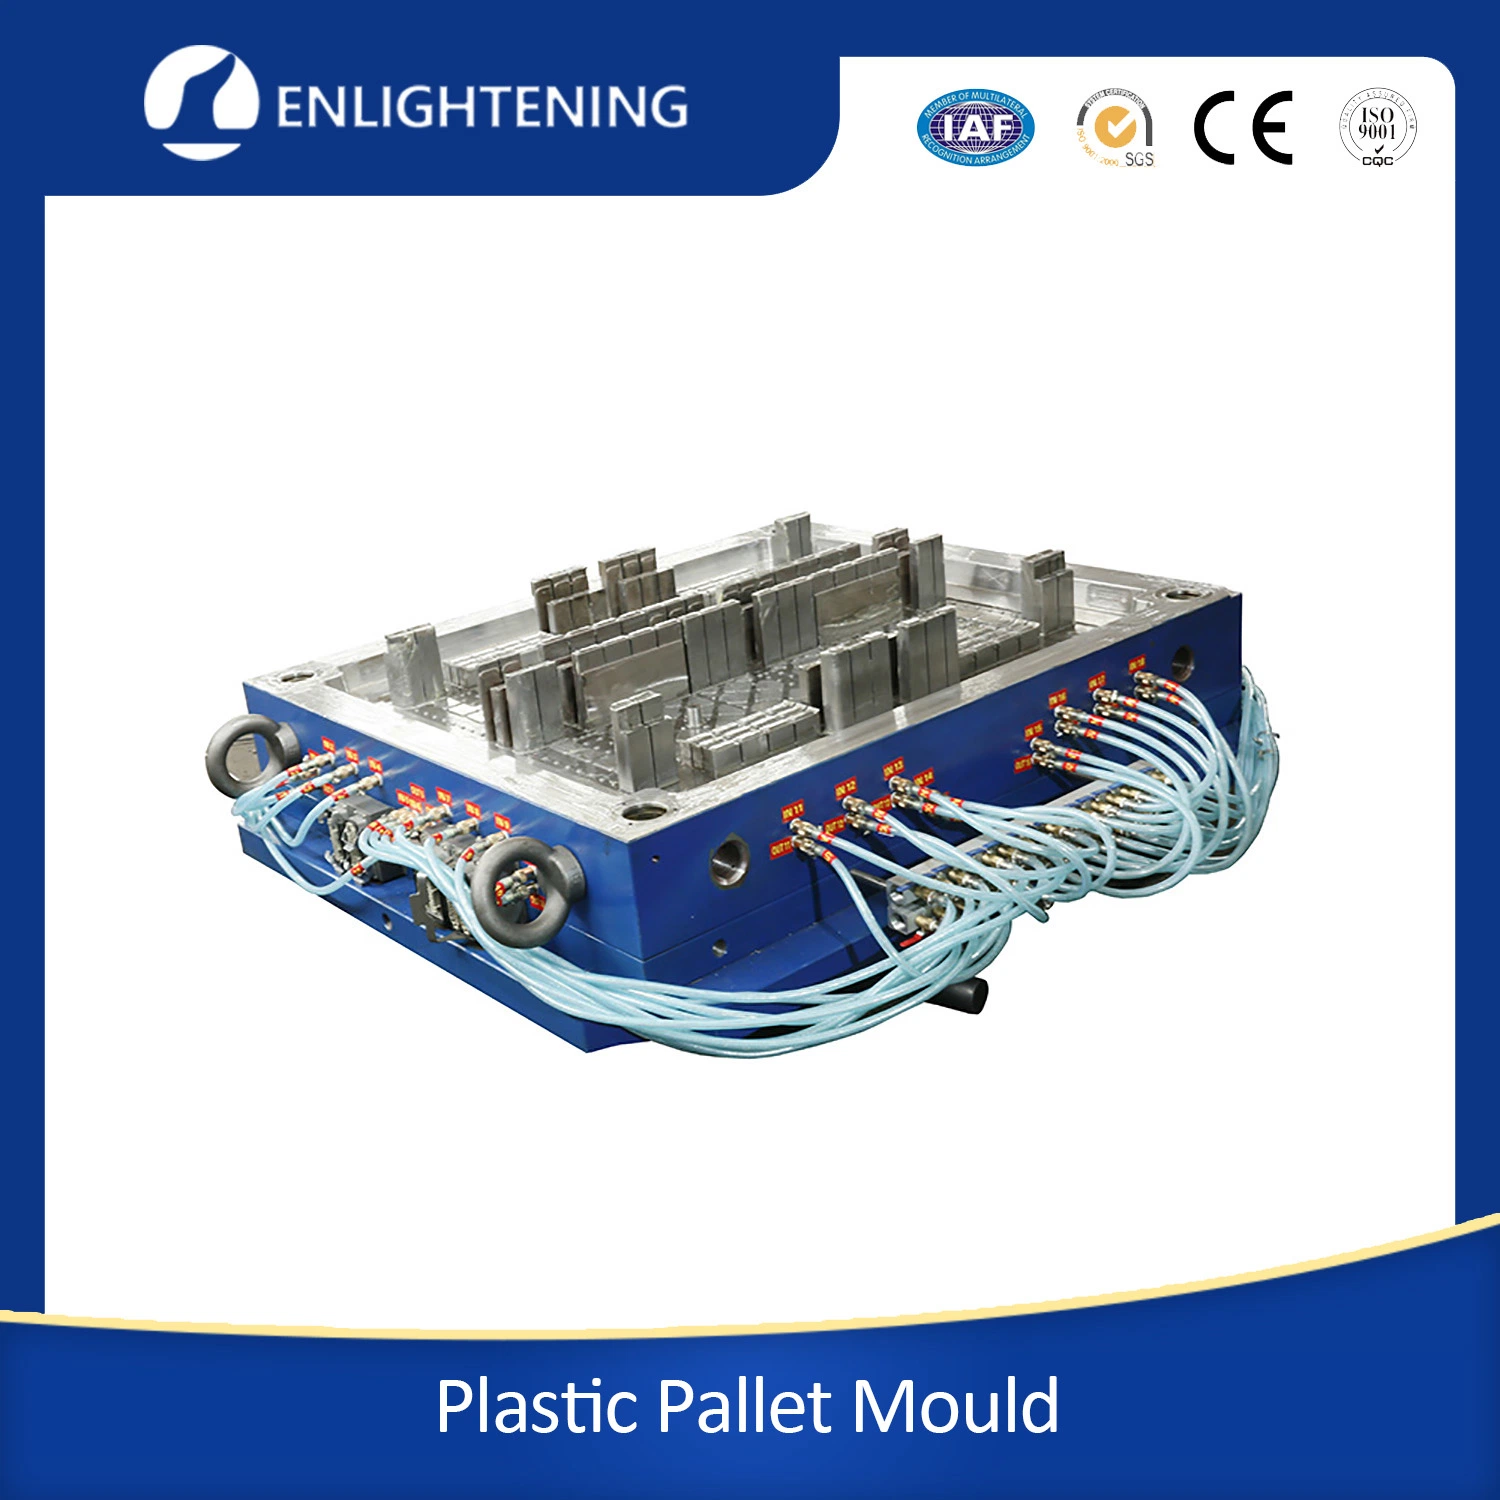 OEM Competitive Price Custom Injection Single Face Industrial Plastic Tray Mould for 1500*1300 Plastic Pallet Injection Mould Making